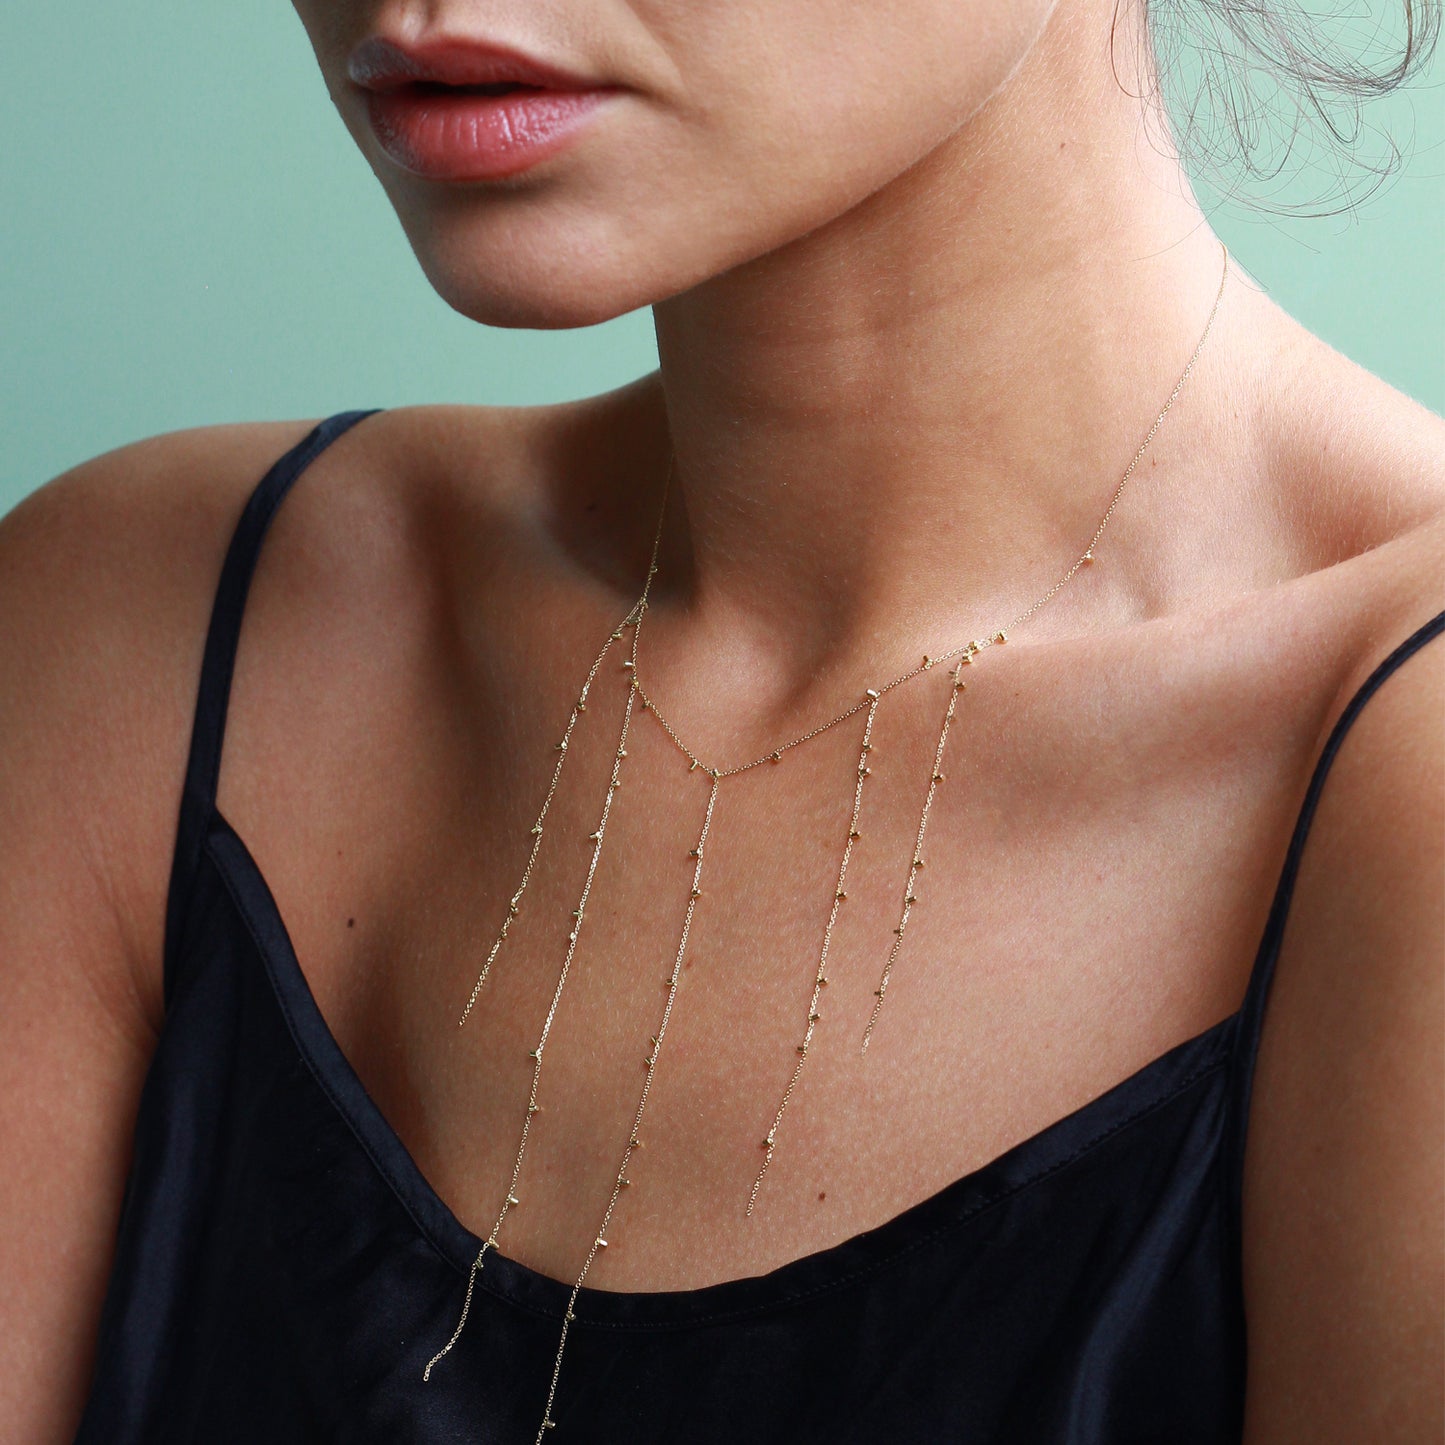 Gold Dust Five Strand Necklace